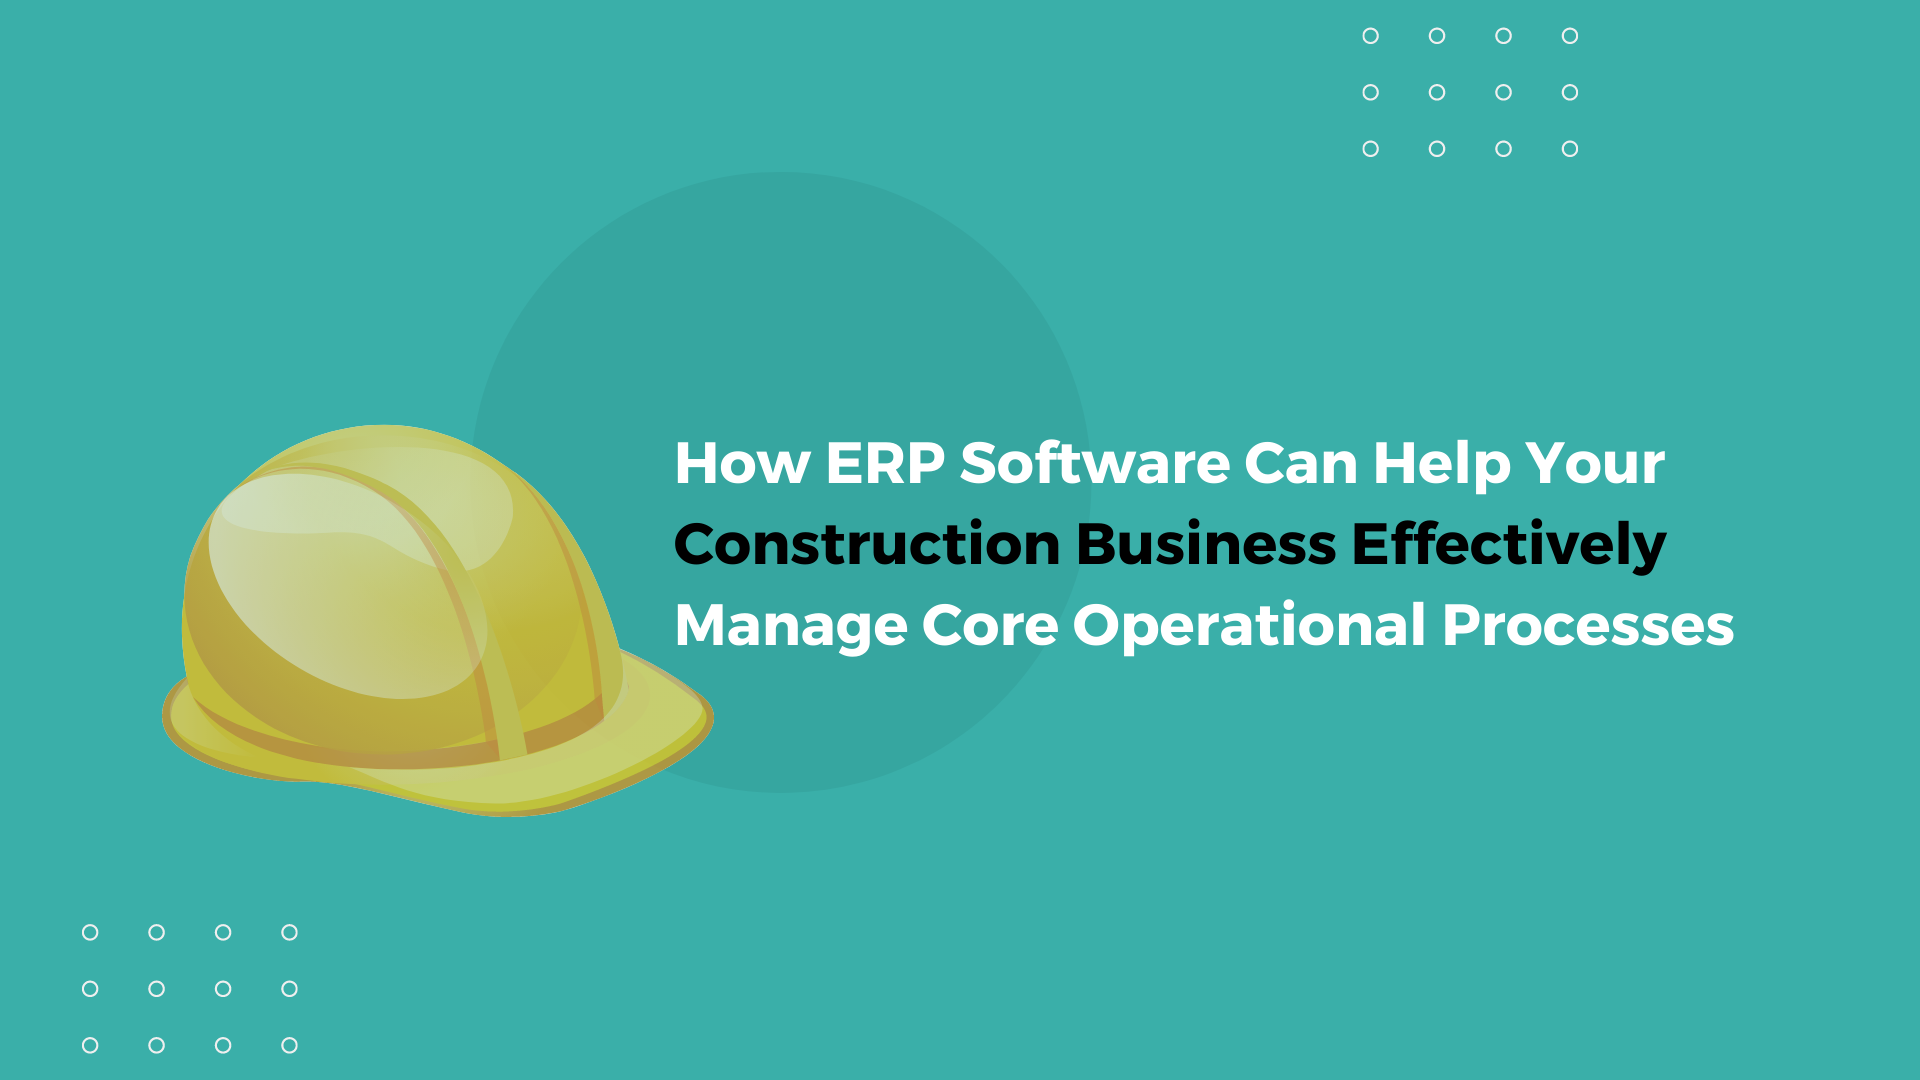 How ERP Software Can Help Your Construction Business Effectively Manage Core Operational Processes